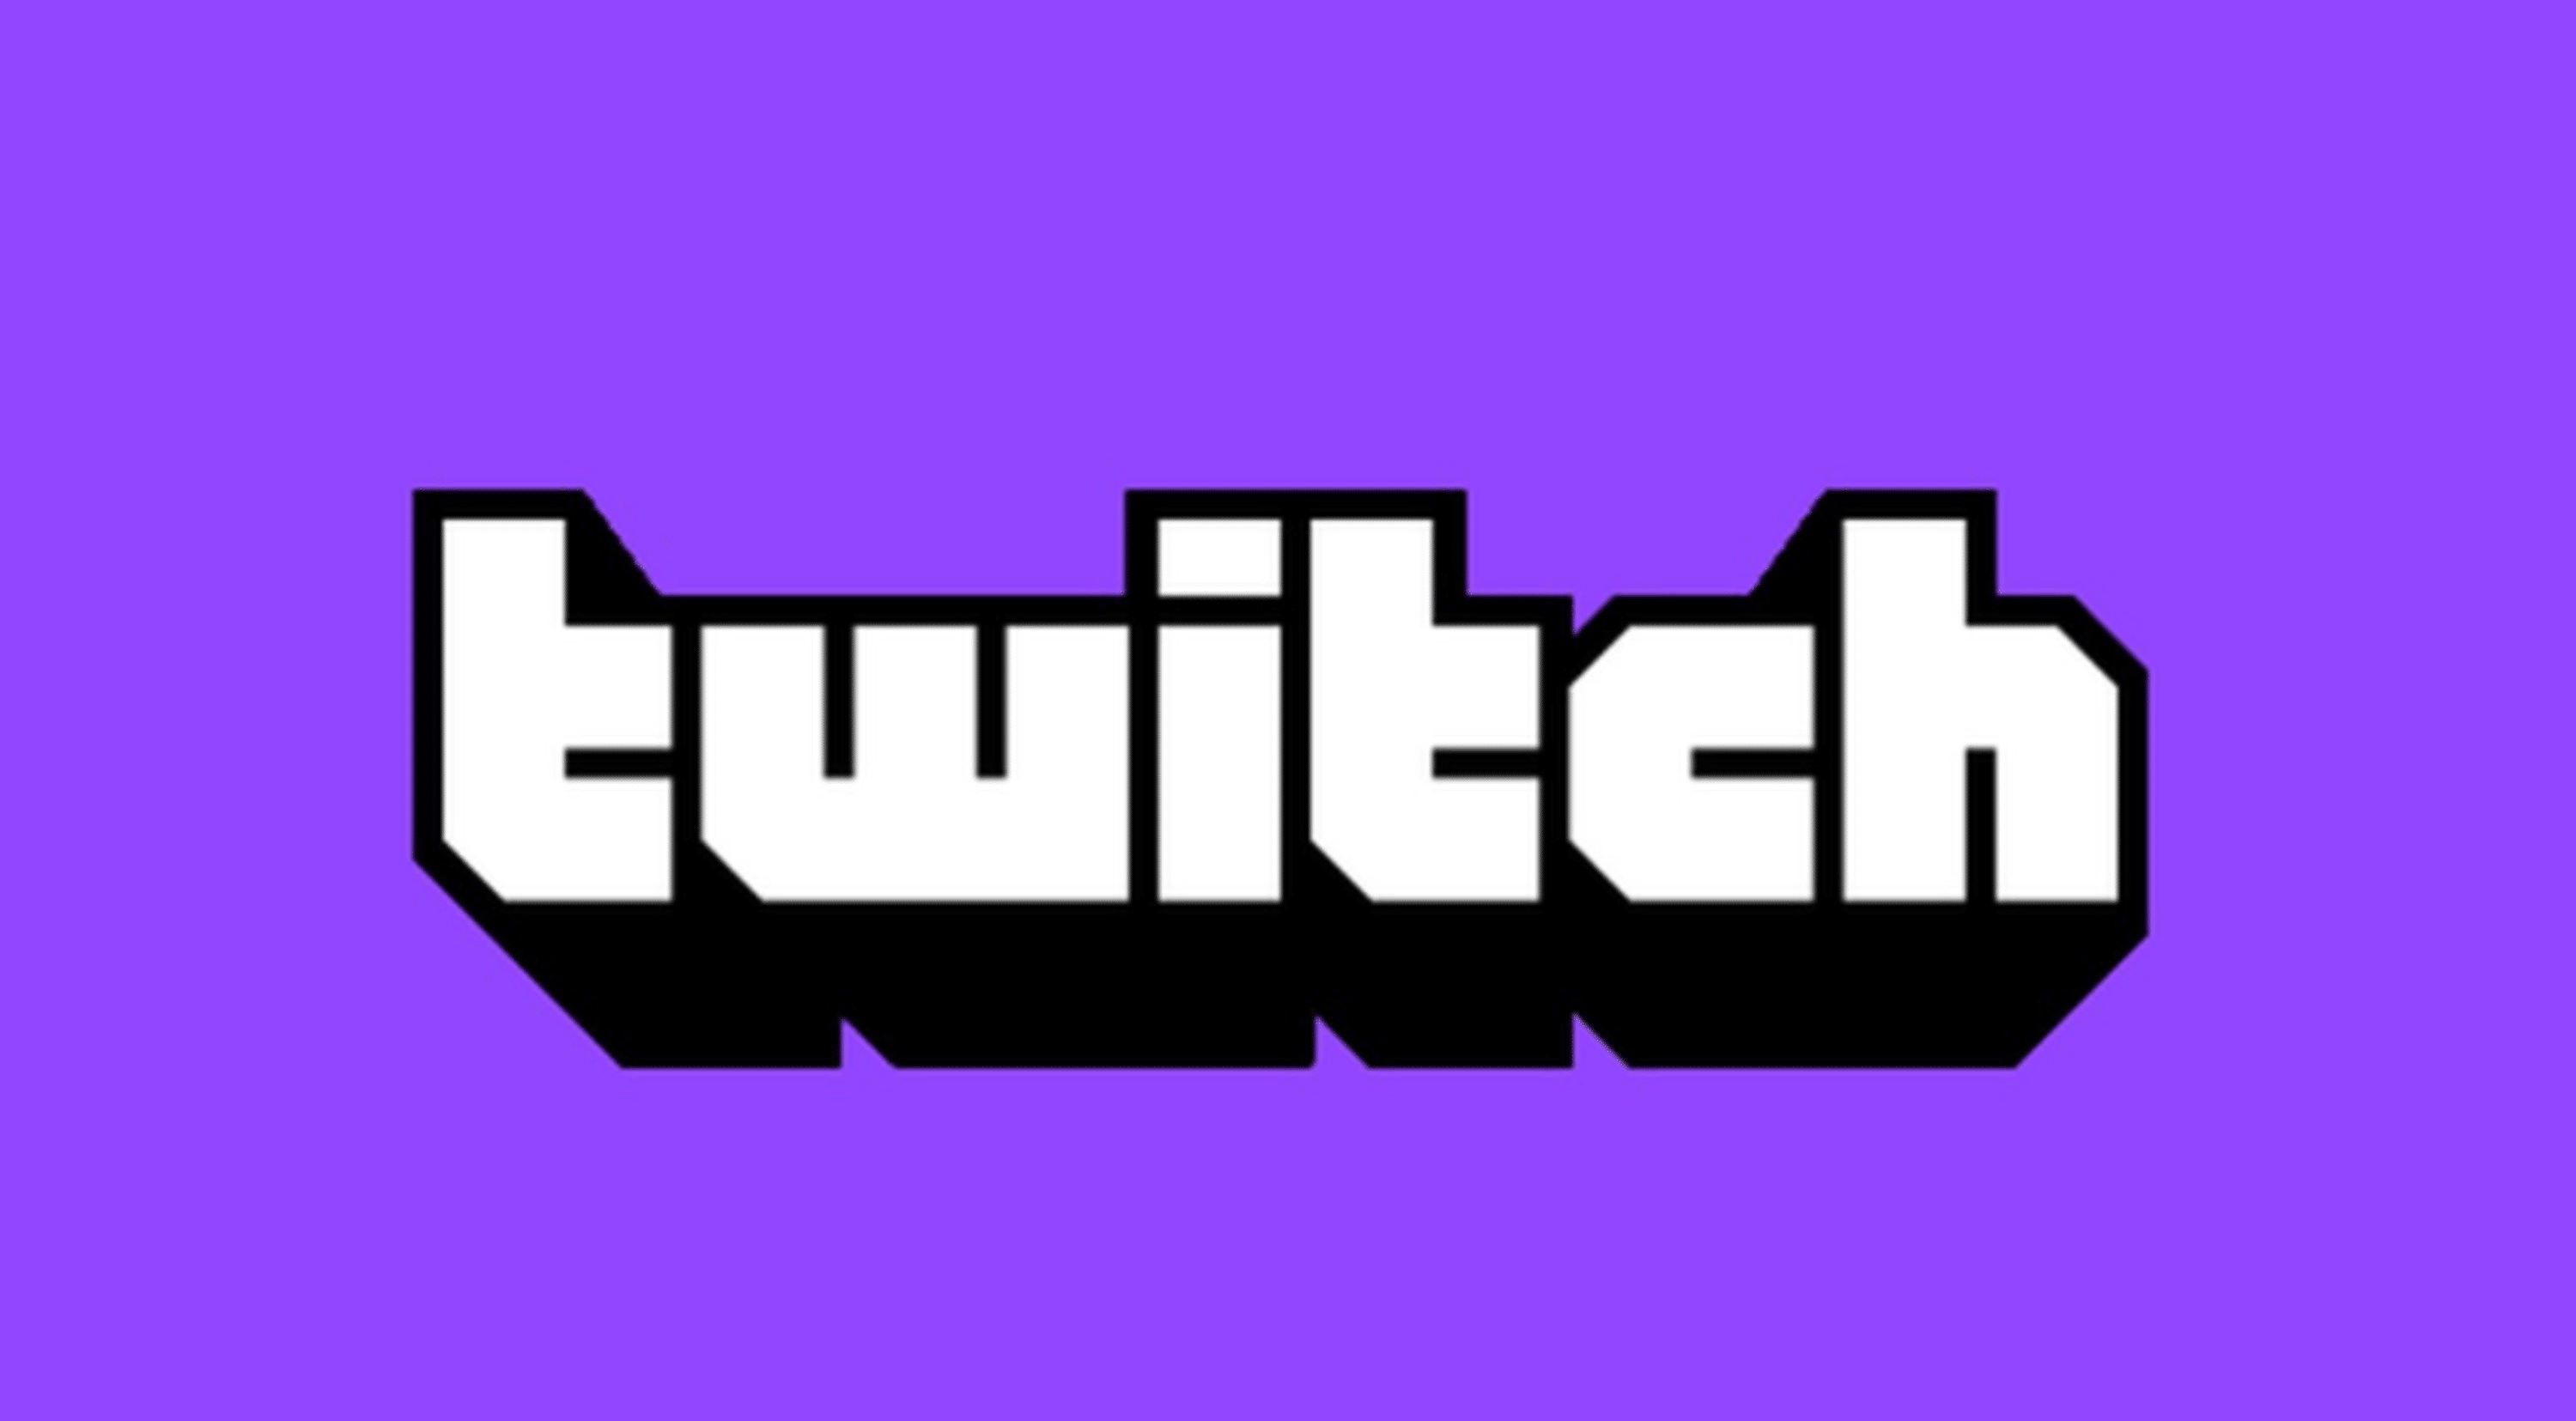 Because Of A New Law In Korea, Twitch Has Decided To Cap Video Quality To 720p